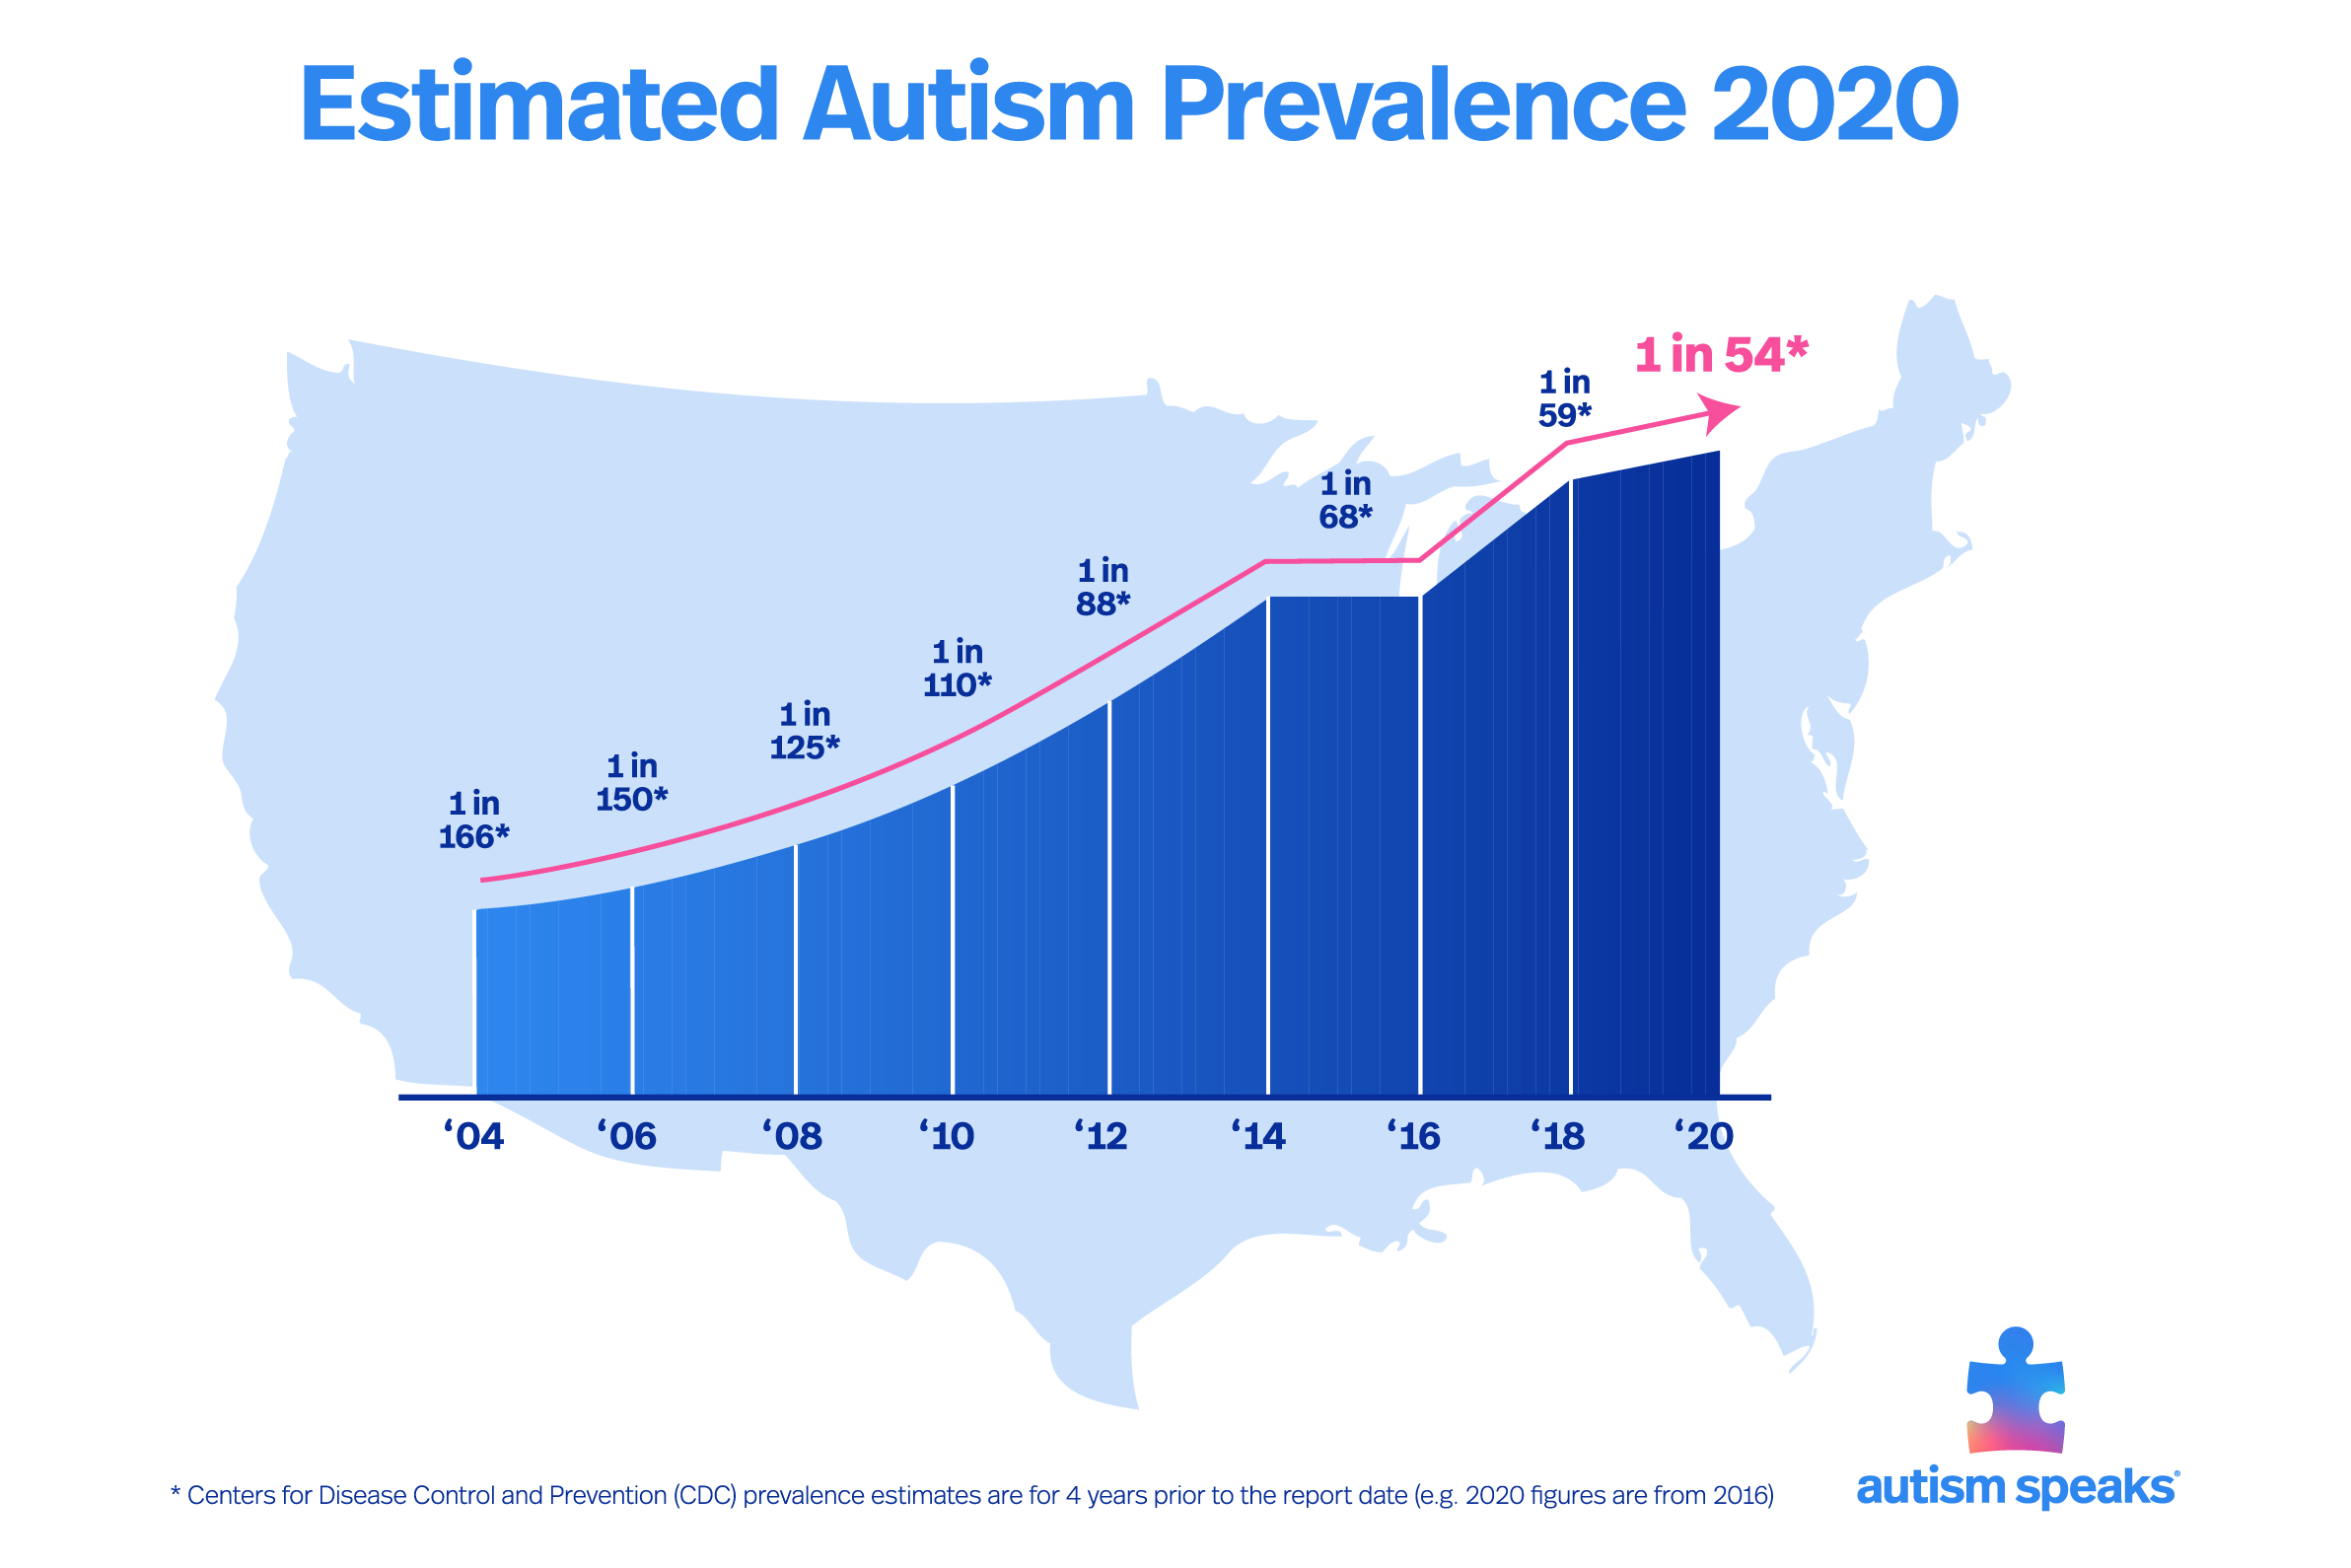 cdc-estimate-on-autism-prevalence-increases-by-nearly-10-percent-to-1